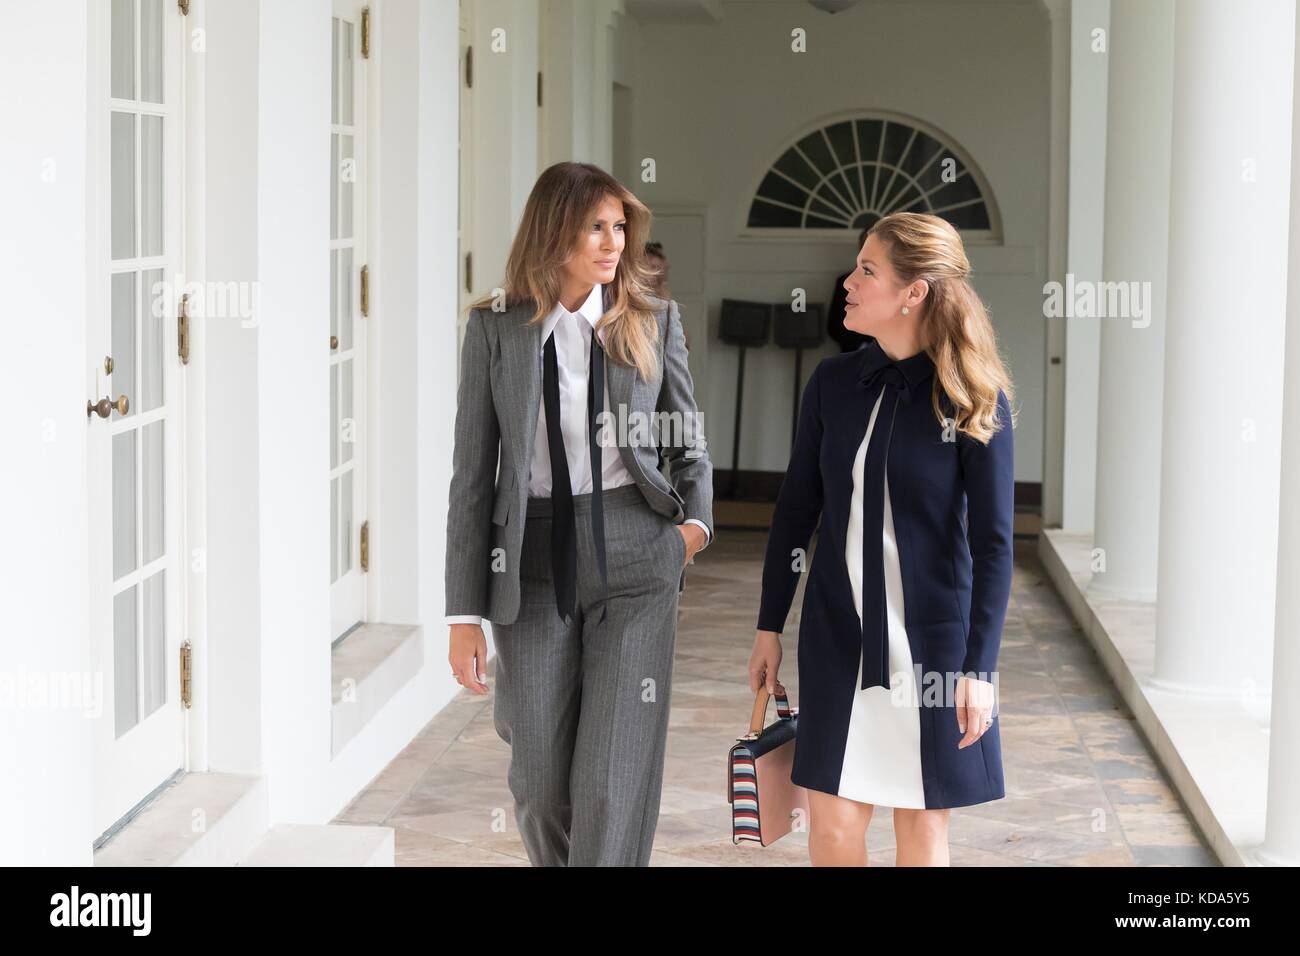 Washington, United States Of America. 11th Oct, 2017. U.S. First Lady Melania Trump, left, walks with the First Lady of Canada Sophie Grégoire Trudeau through the White House Colonnade October 11, 2017 in Washington, DC. Credit: Planetpix/Alamy Live News Stock Photo